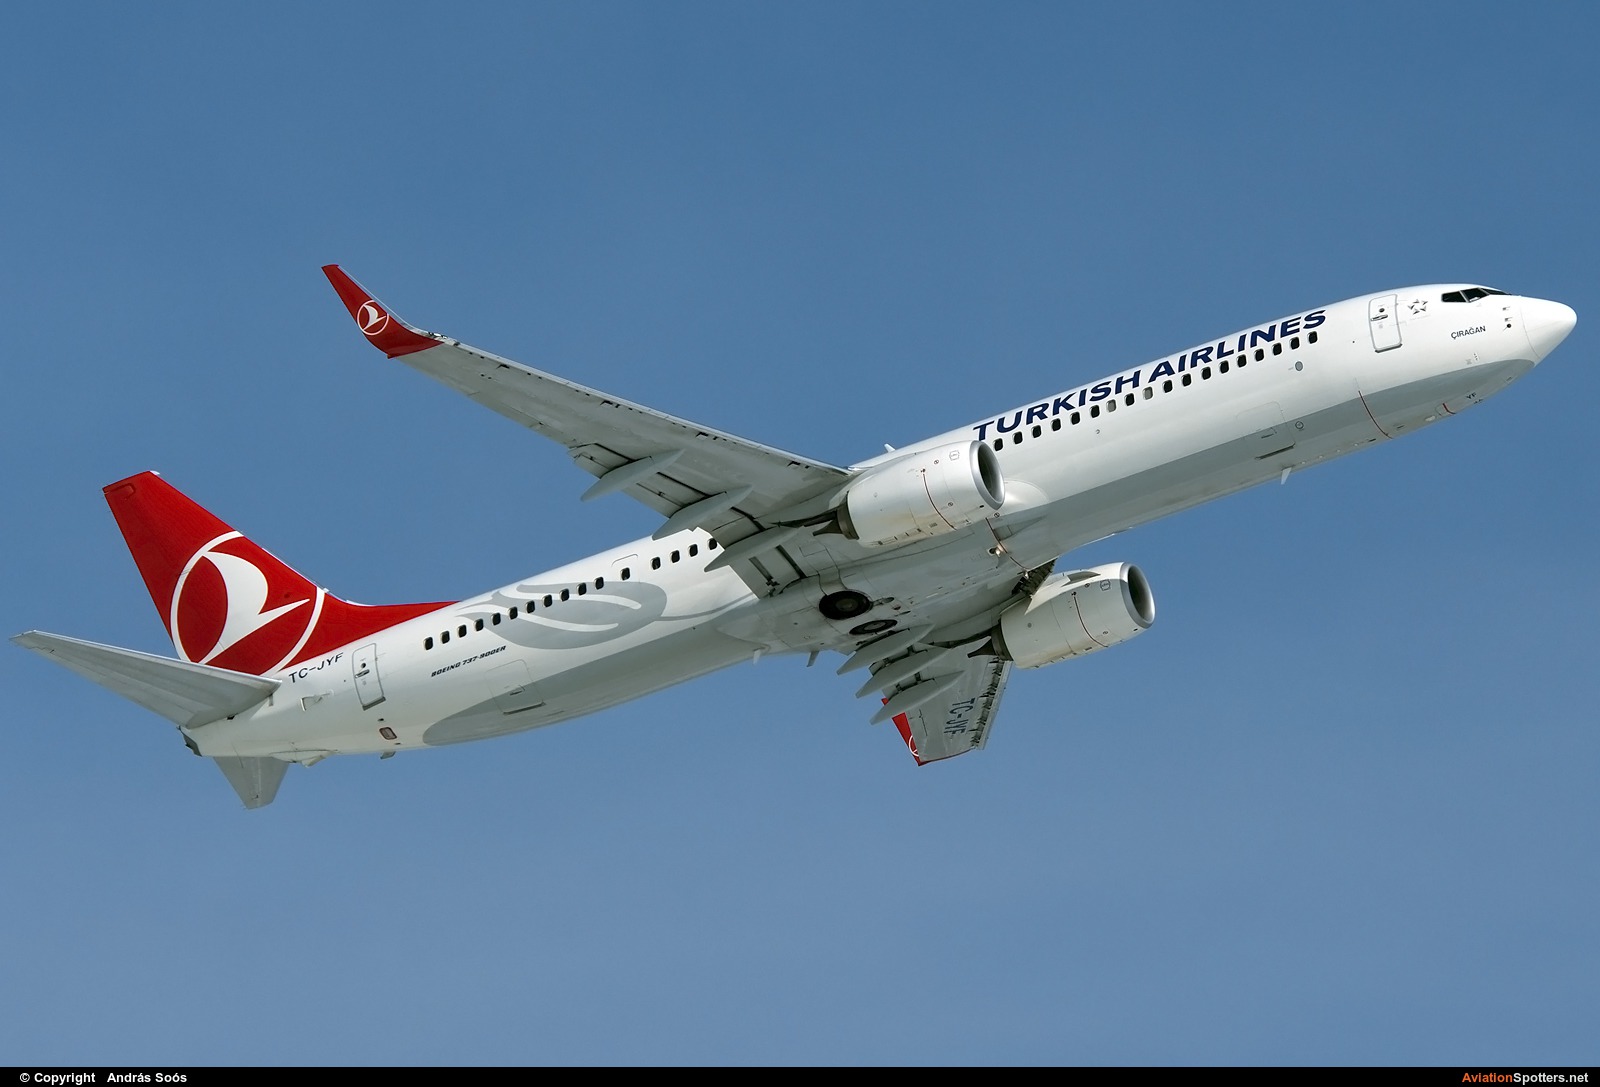 Turkish Airlines  -  737-900ER  (TC-JYF) By András Soós (sas1965)